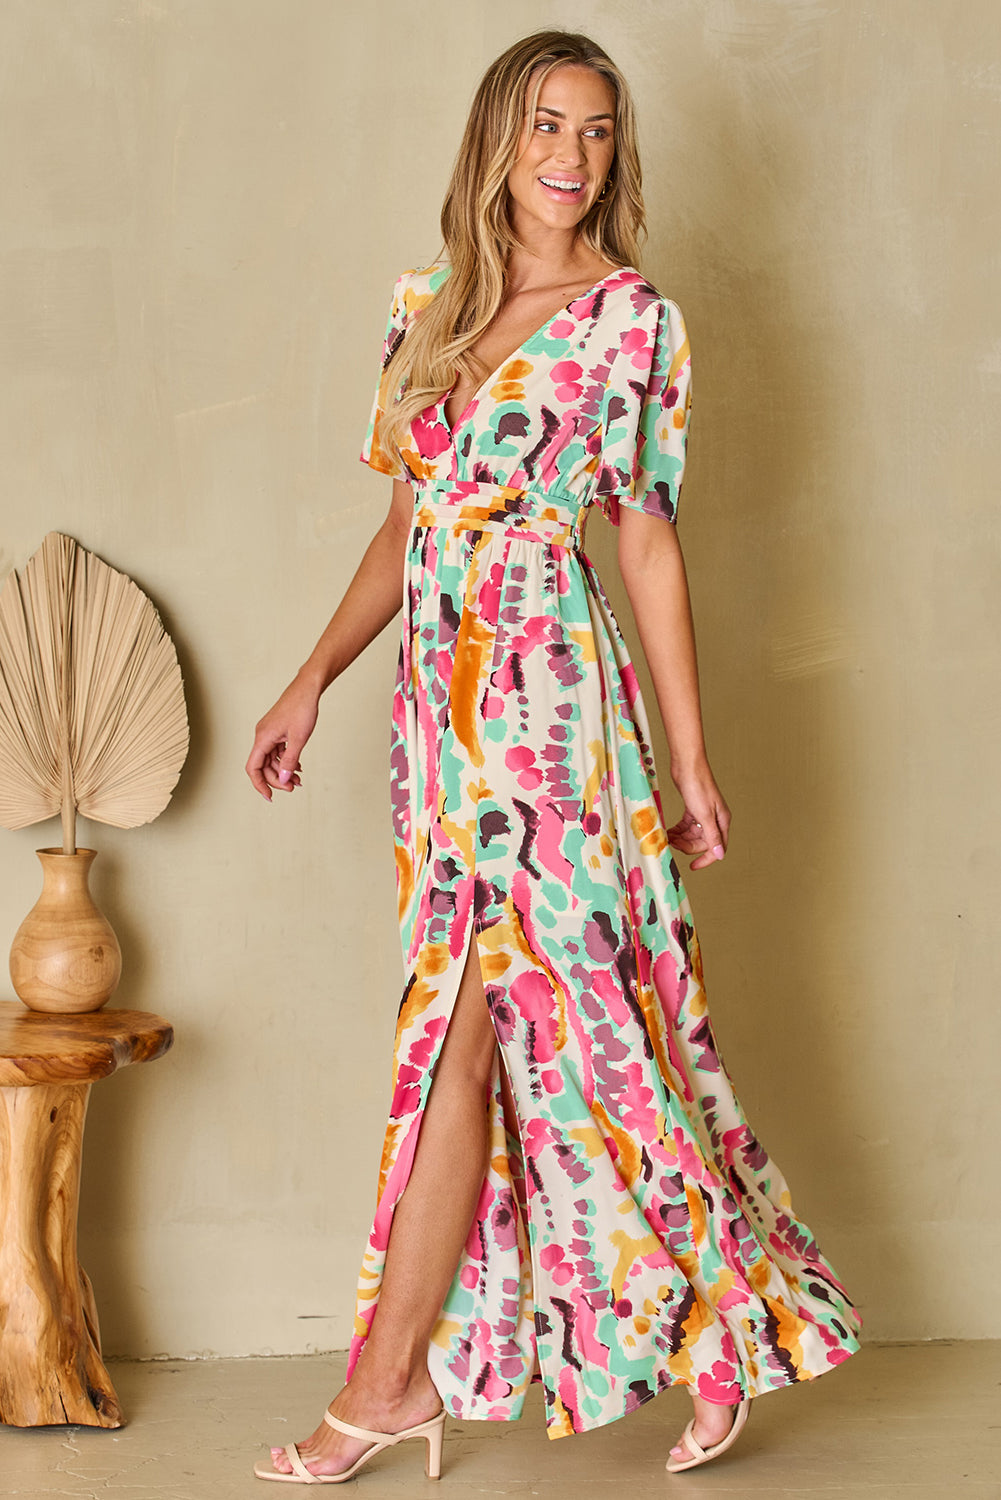 Brushed Floral Maxi Dress - Cheeky Chic Boutique